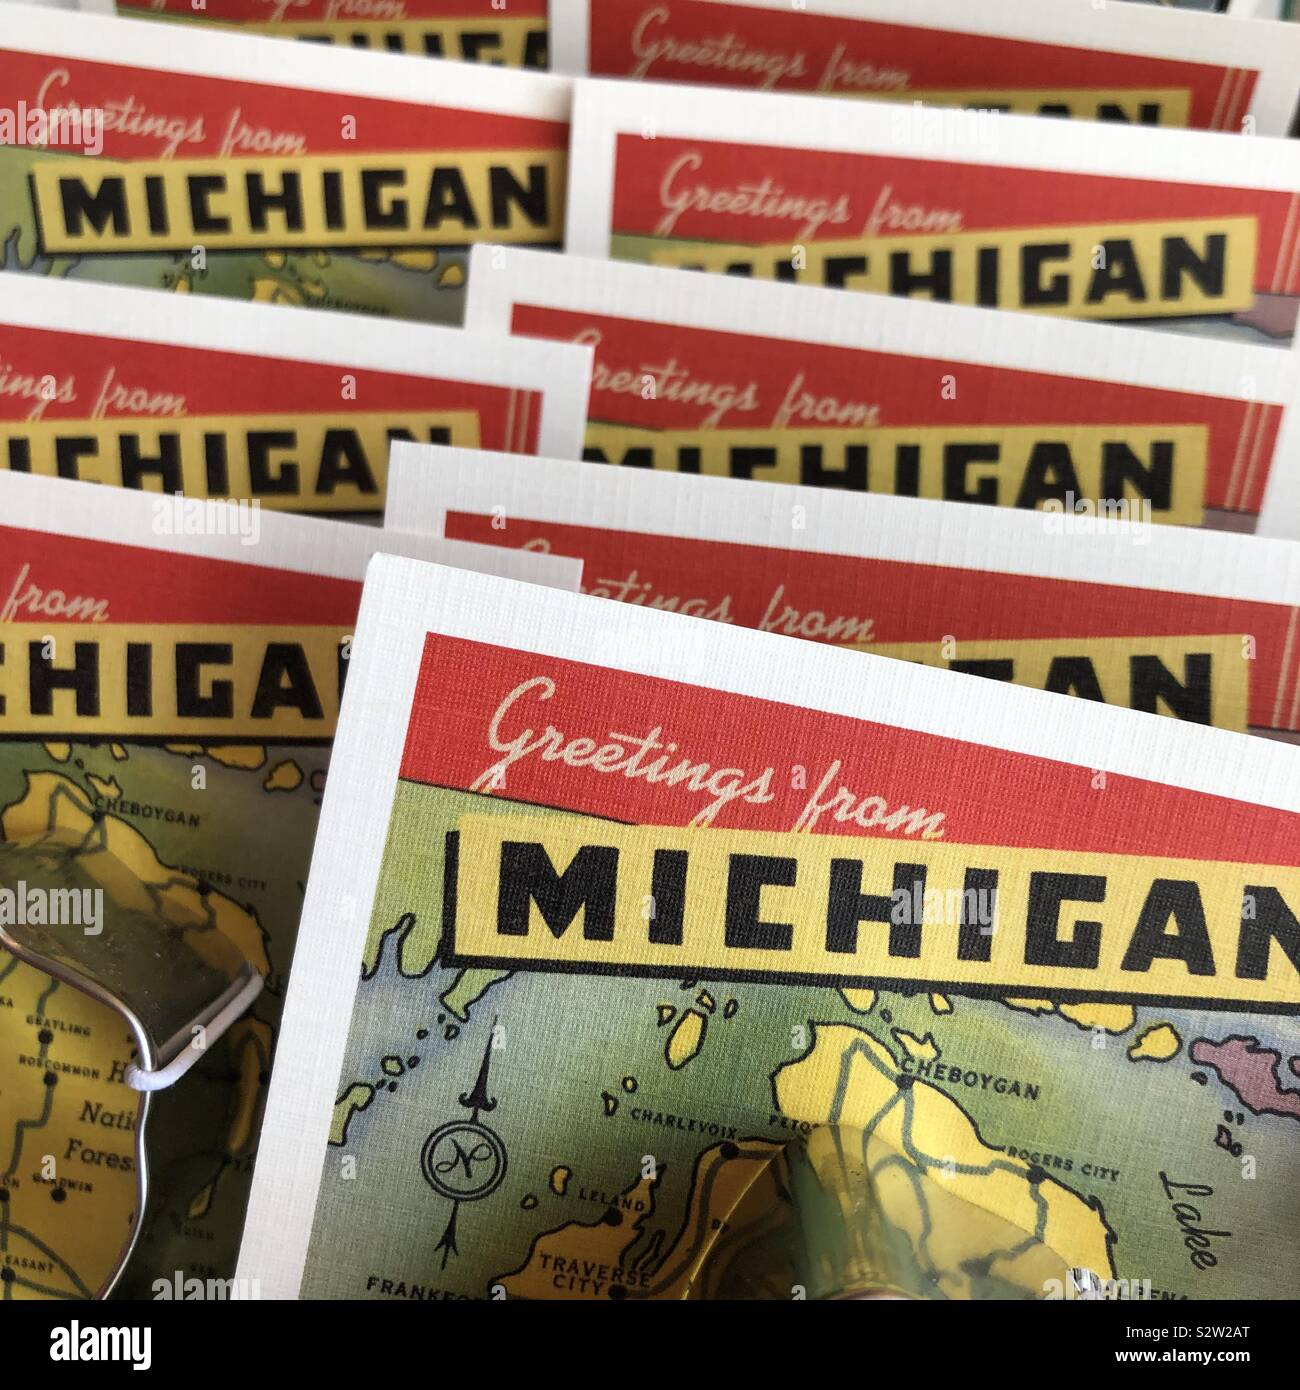 A closeup view of cards that say “greetings from Michigan” aligned on display in a store Stock Photo